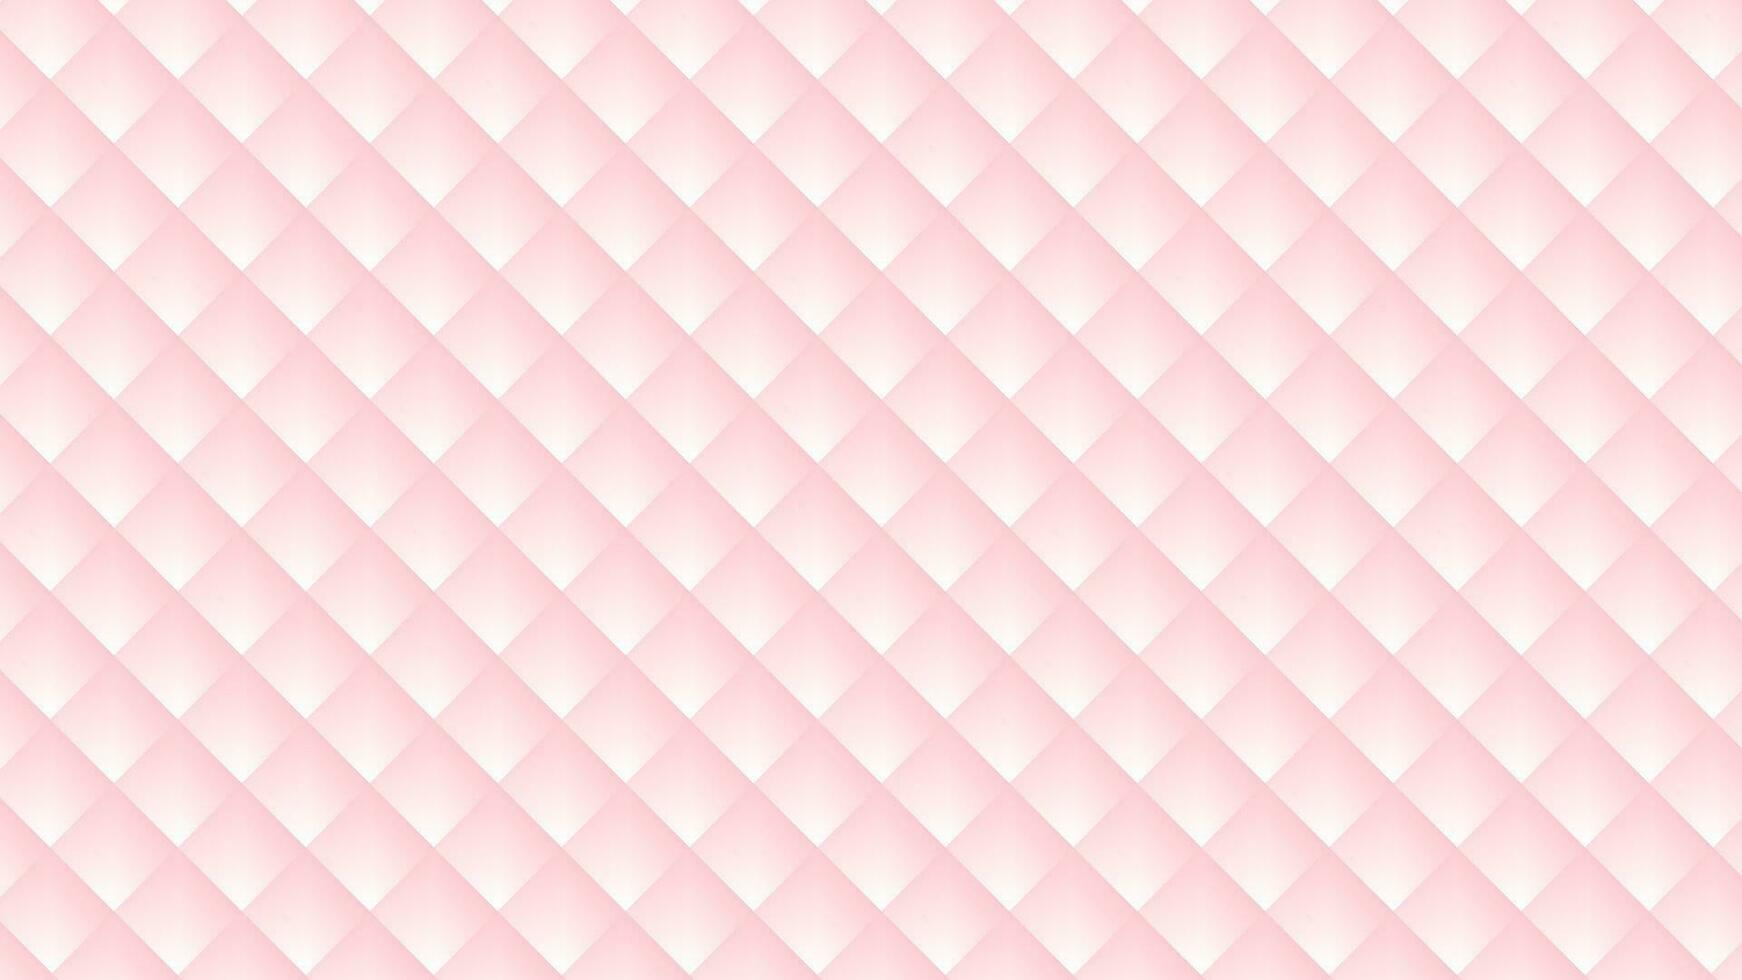 Vector illustration pink wave seamless pattern,Soft gradient pastel waves,Abtract geometric pink